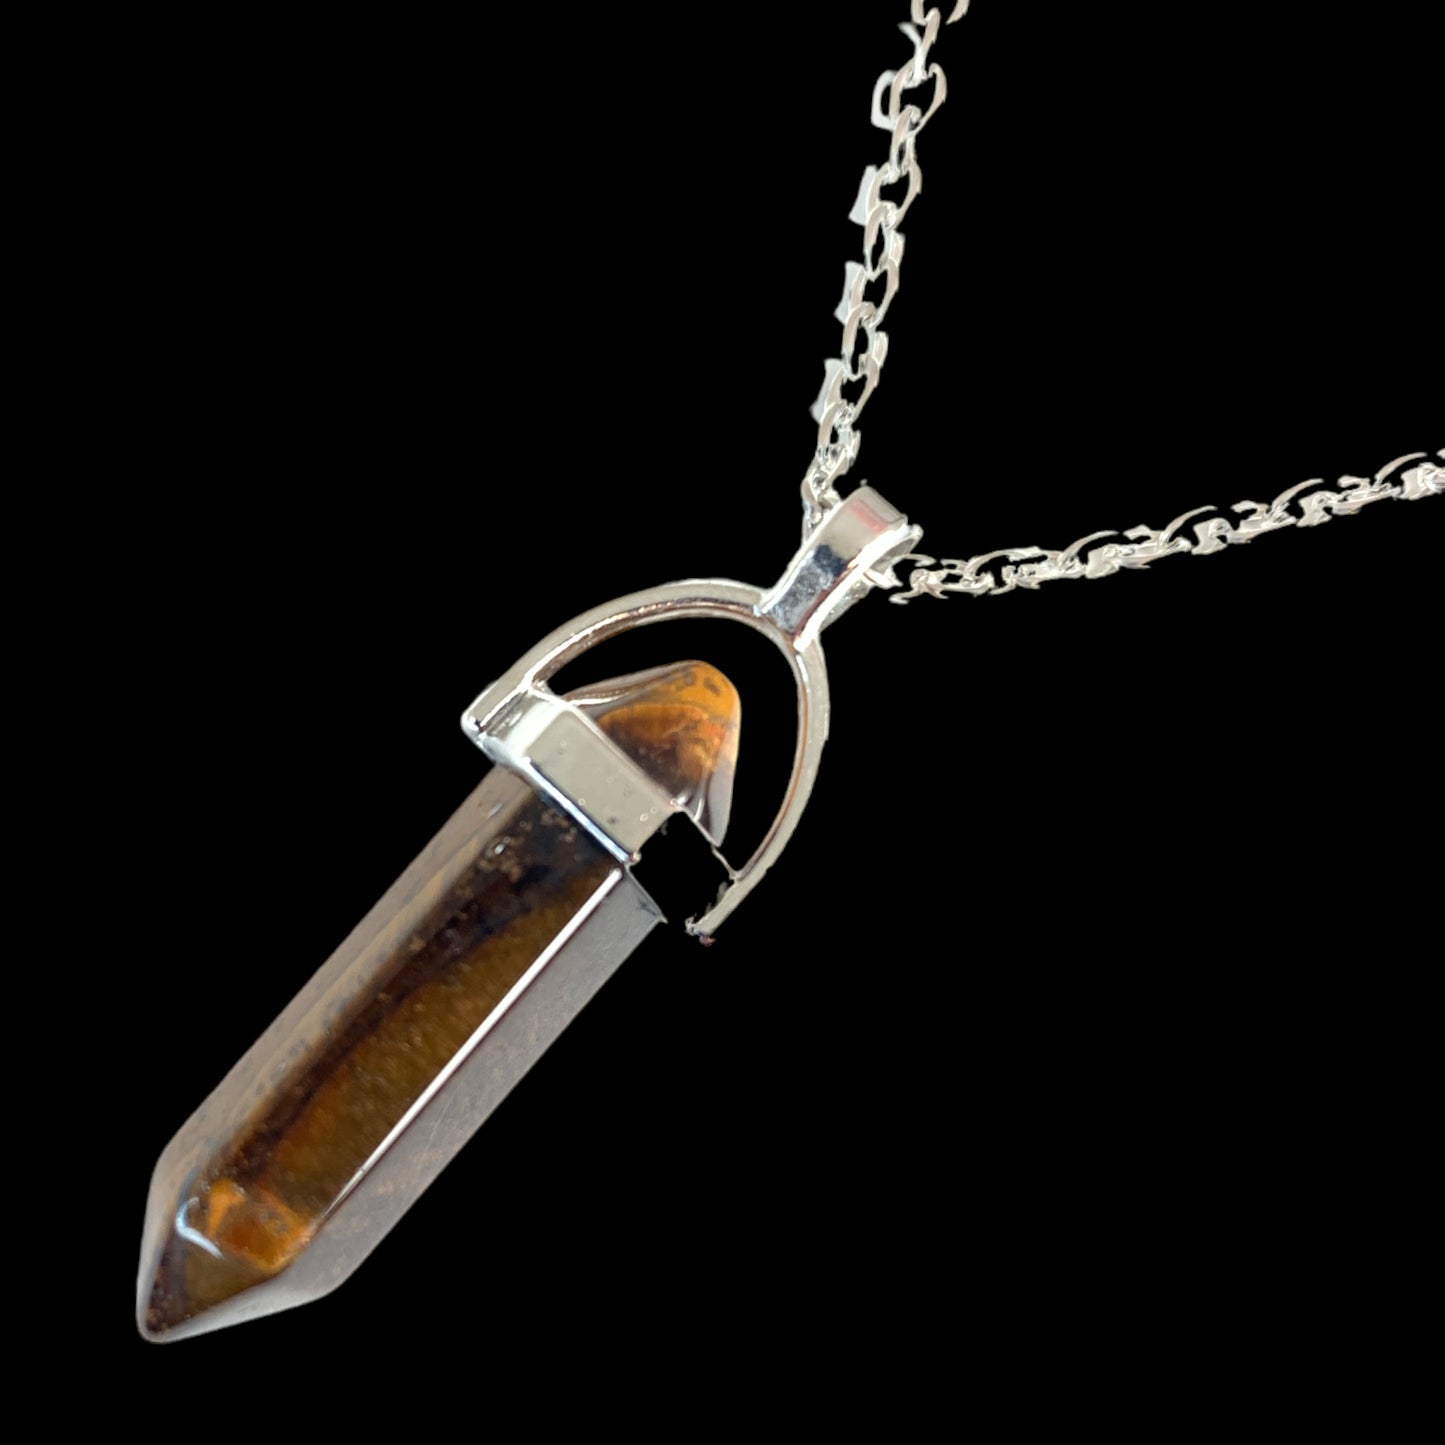 Tigers Eye Double Terminated Pendulum Stone Pendant 13x35mm with 18 Inch Chain 2 lnch Extender Chain - China - NEW922